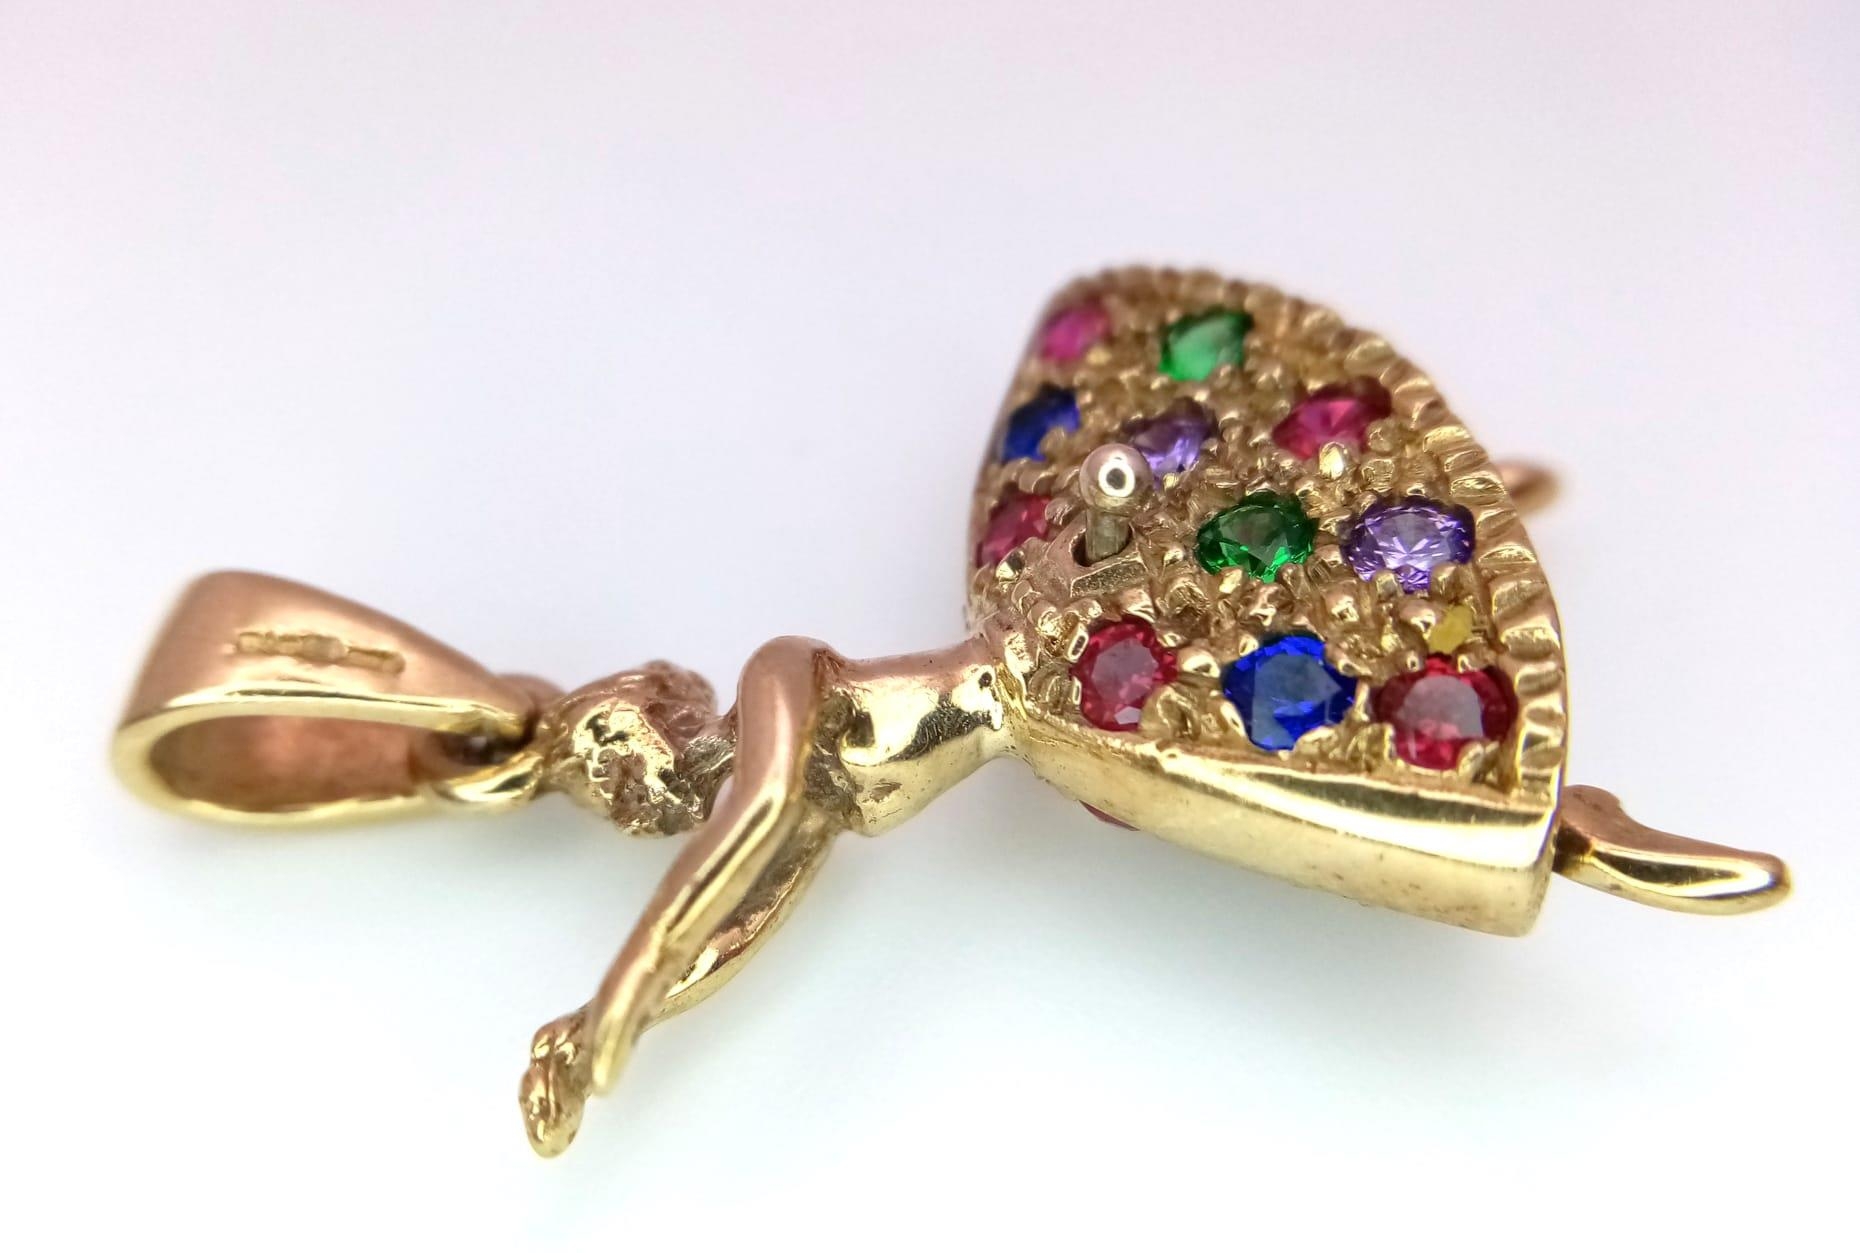 A 9kt Yellow Gold Jewelled Dancing Ballerina Charm/Pendant. Measures 3cm in length. Weight: 5.06g - Image 3 of 6